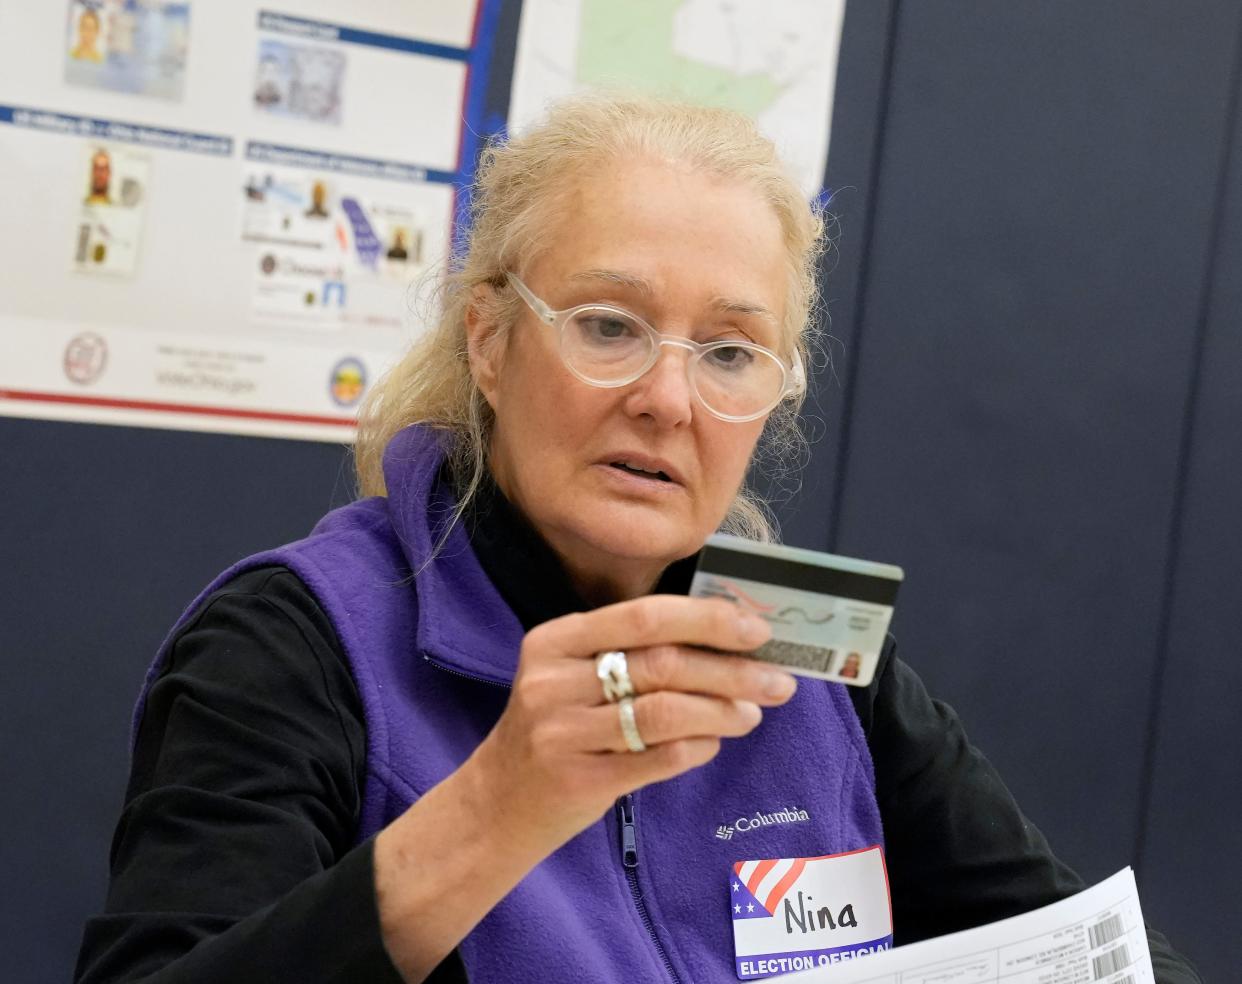 Poll worker Nina Roslovic, 66, of Grandview checks a drivers license at Darbydale Elementary in Grove City on Tuesday.